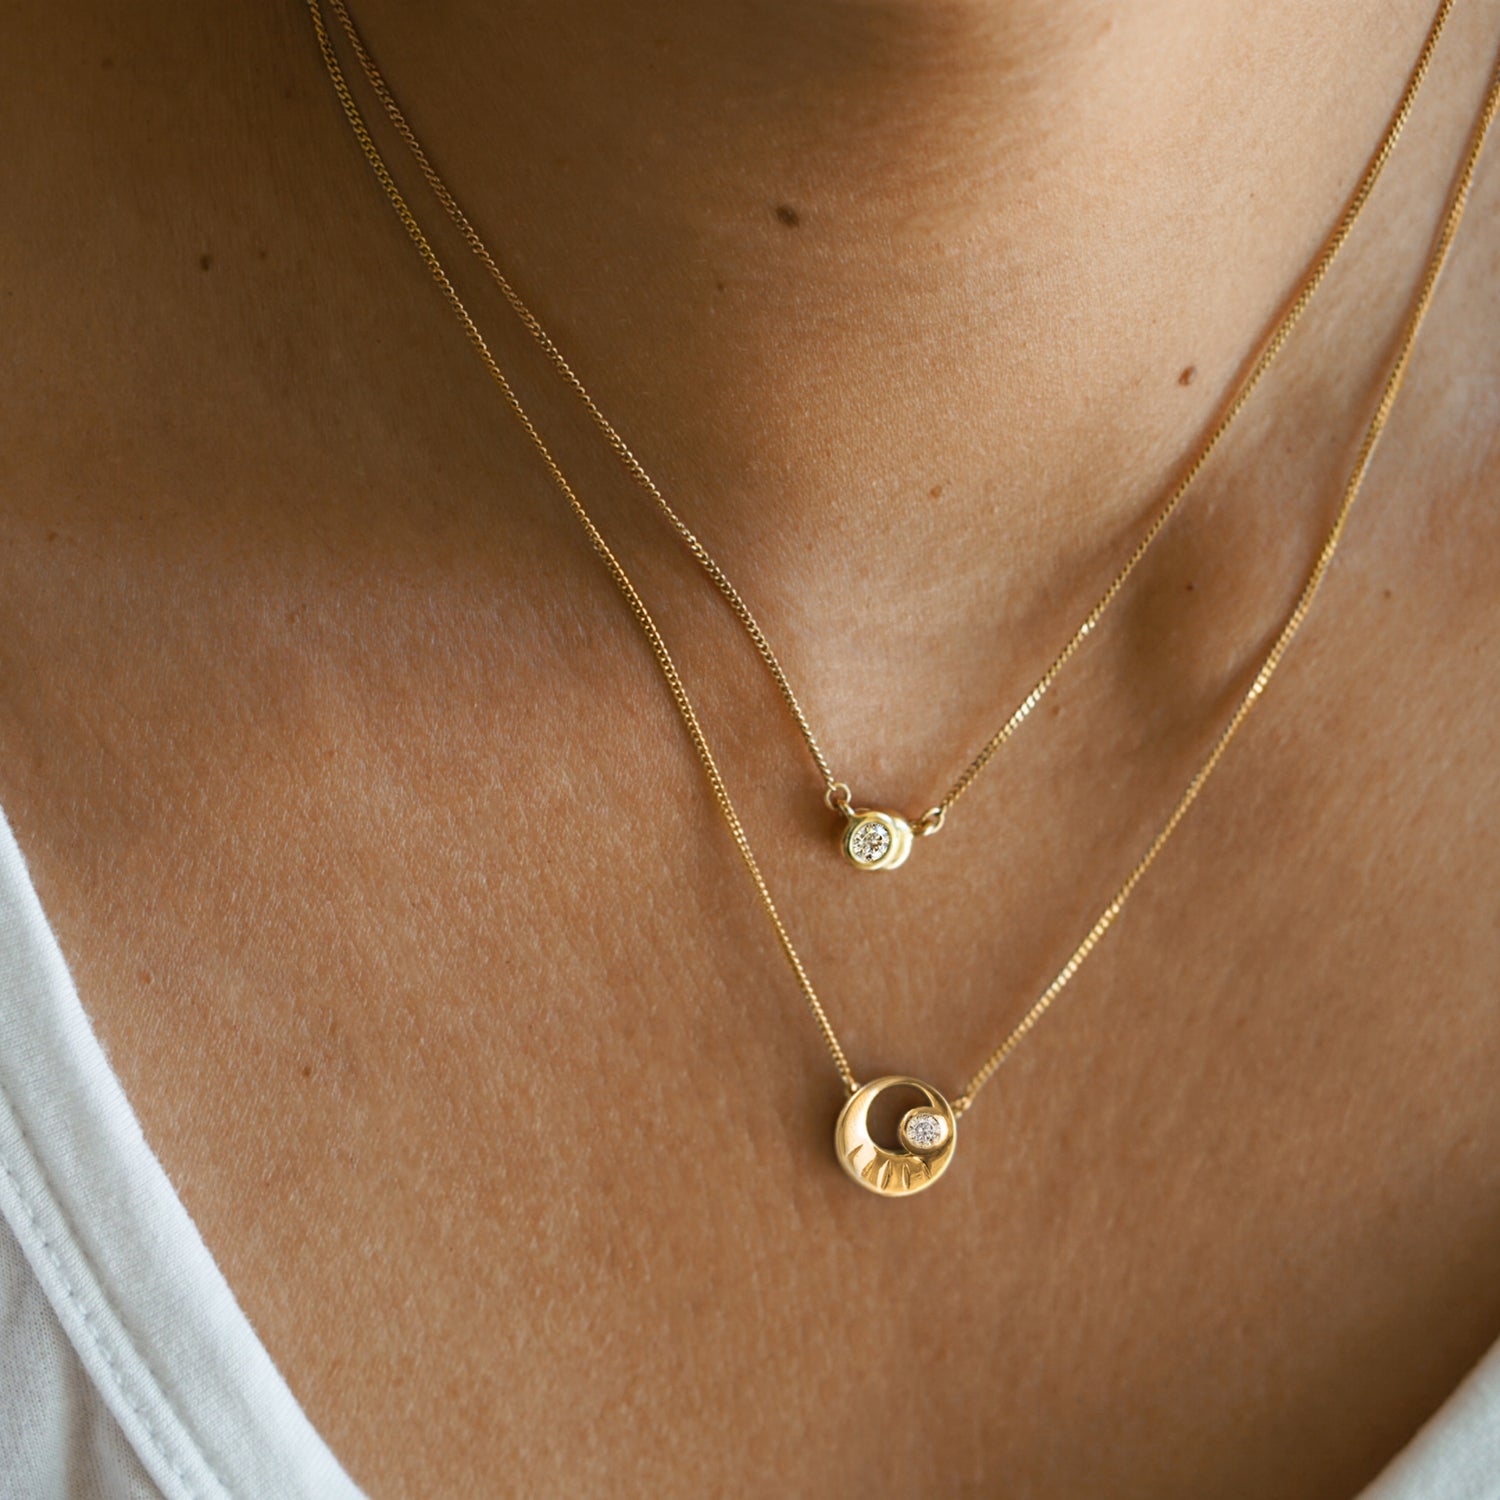 Solid Gold Lab Diamond Necklace Made in Australia